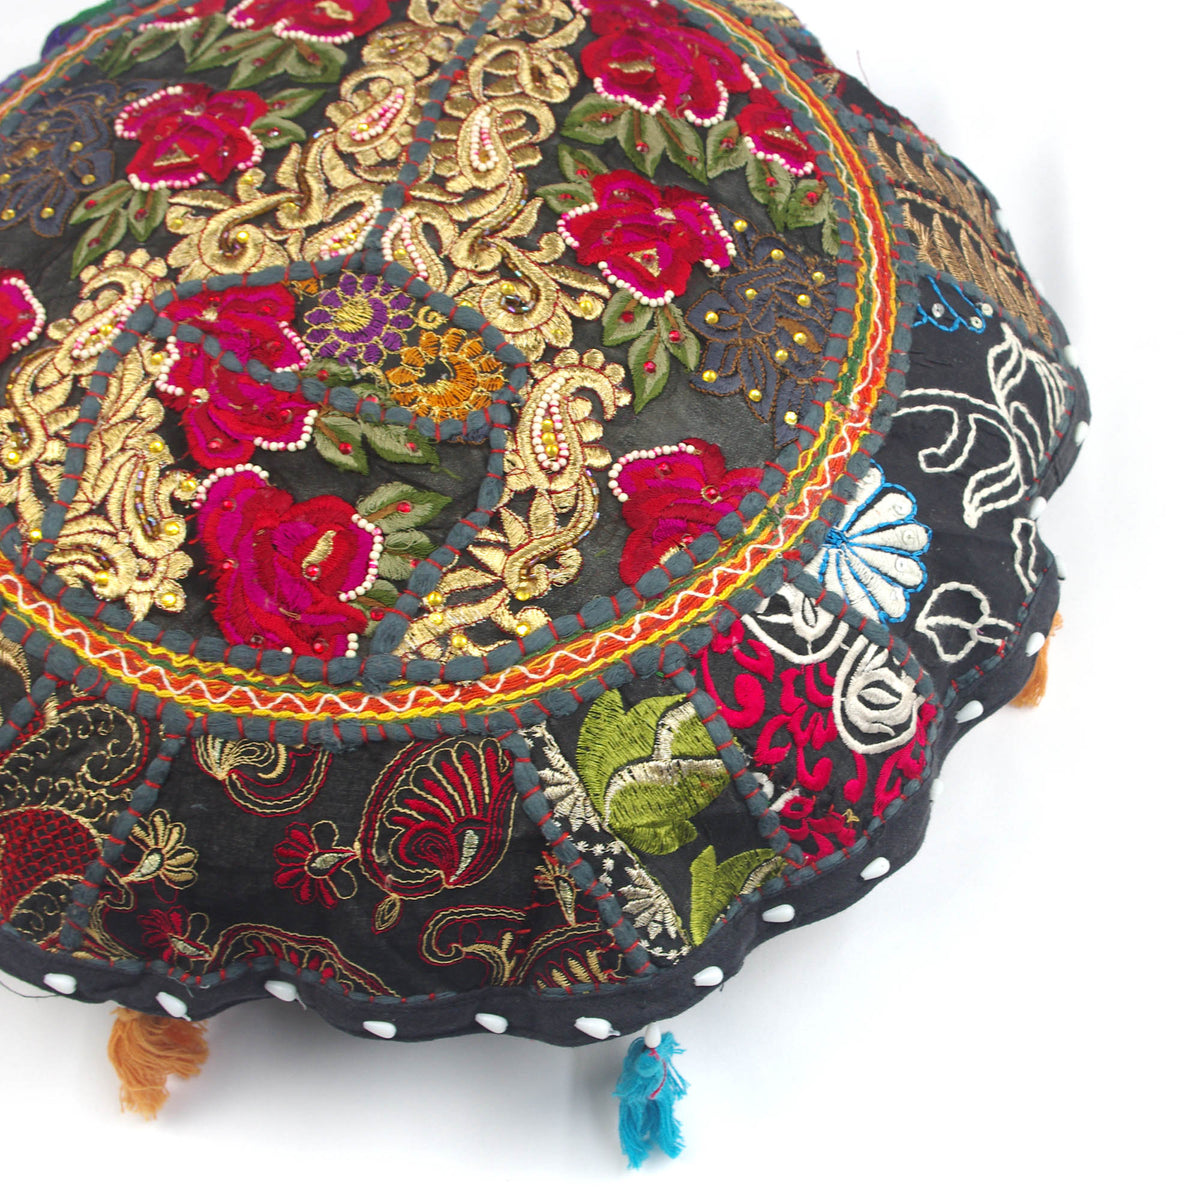 Round Black Floor Embroidered Patchwork Pouf Ottoman Indian Vintage Cushion Cover 18"